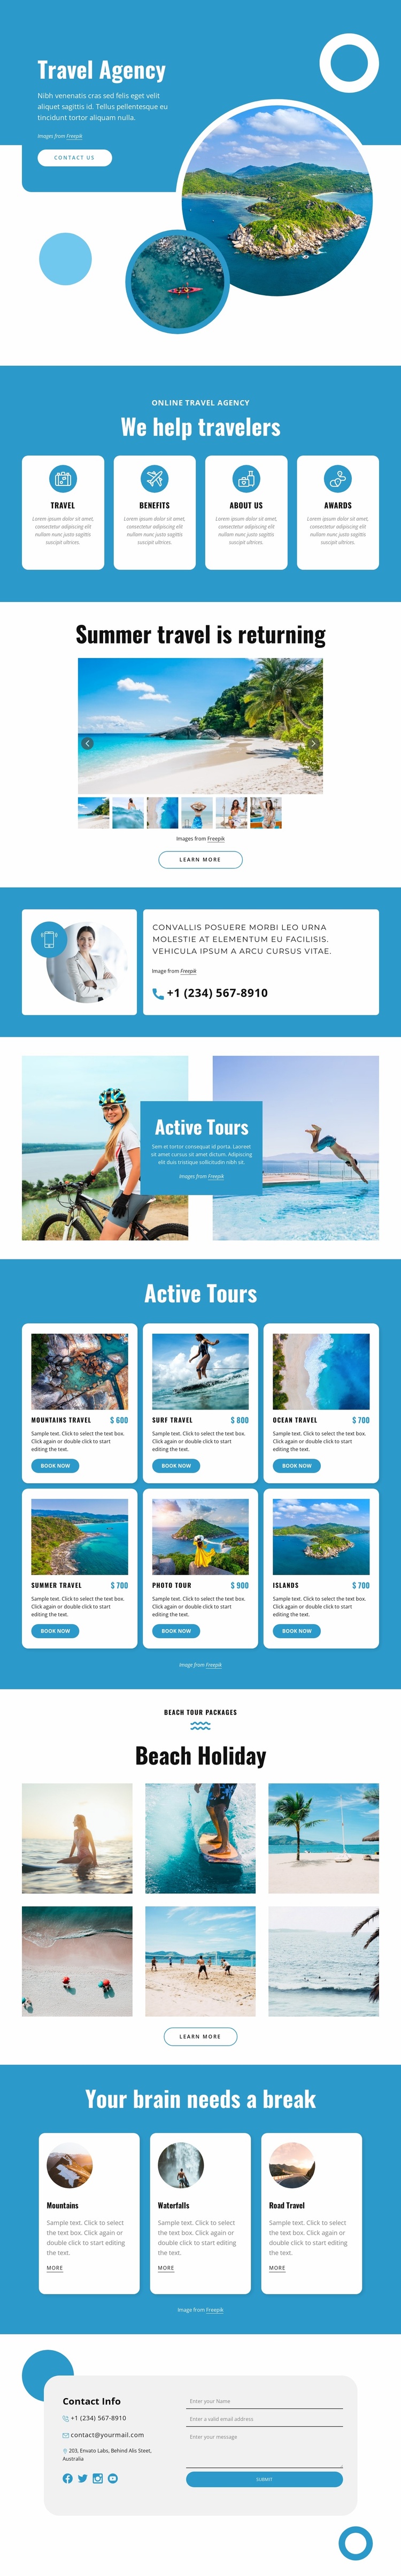 Book flights, vacation packages, tours Ecommerce Website Design